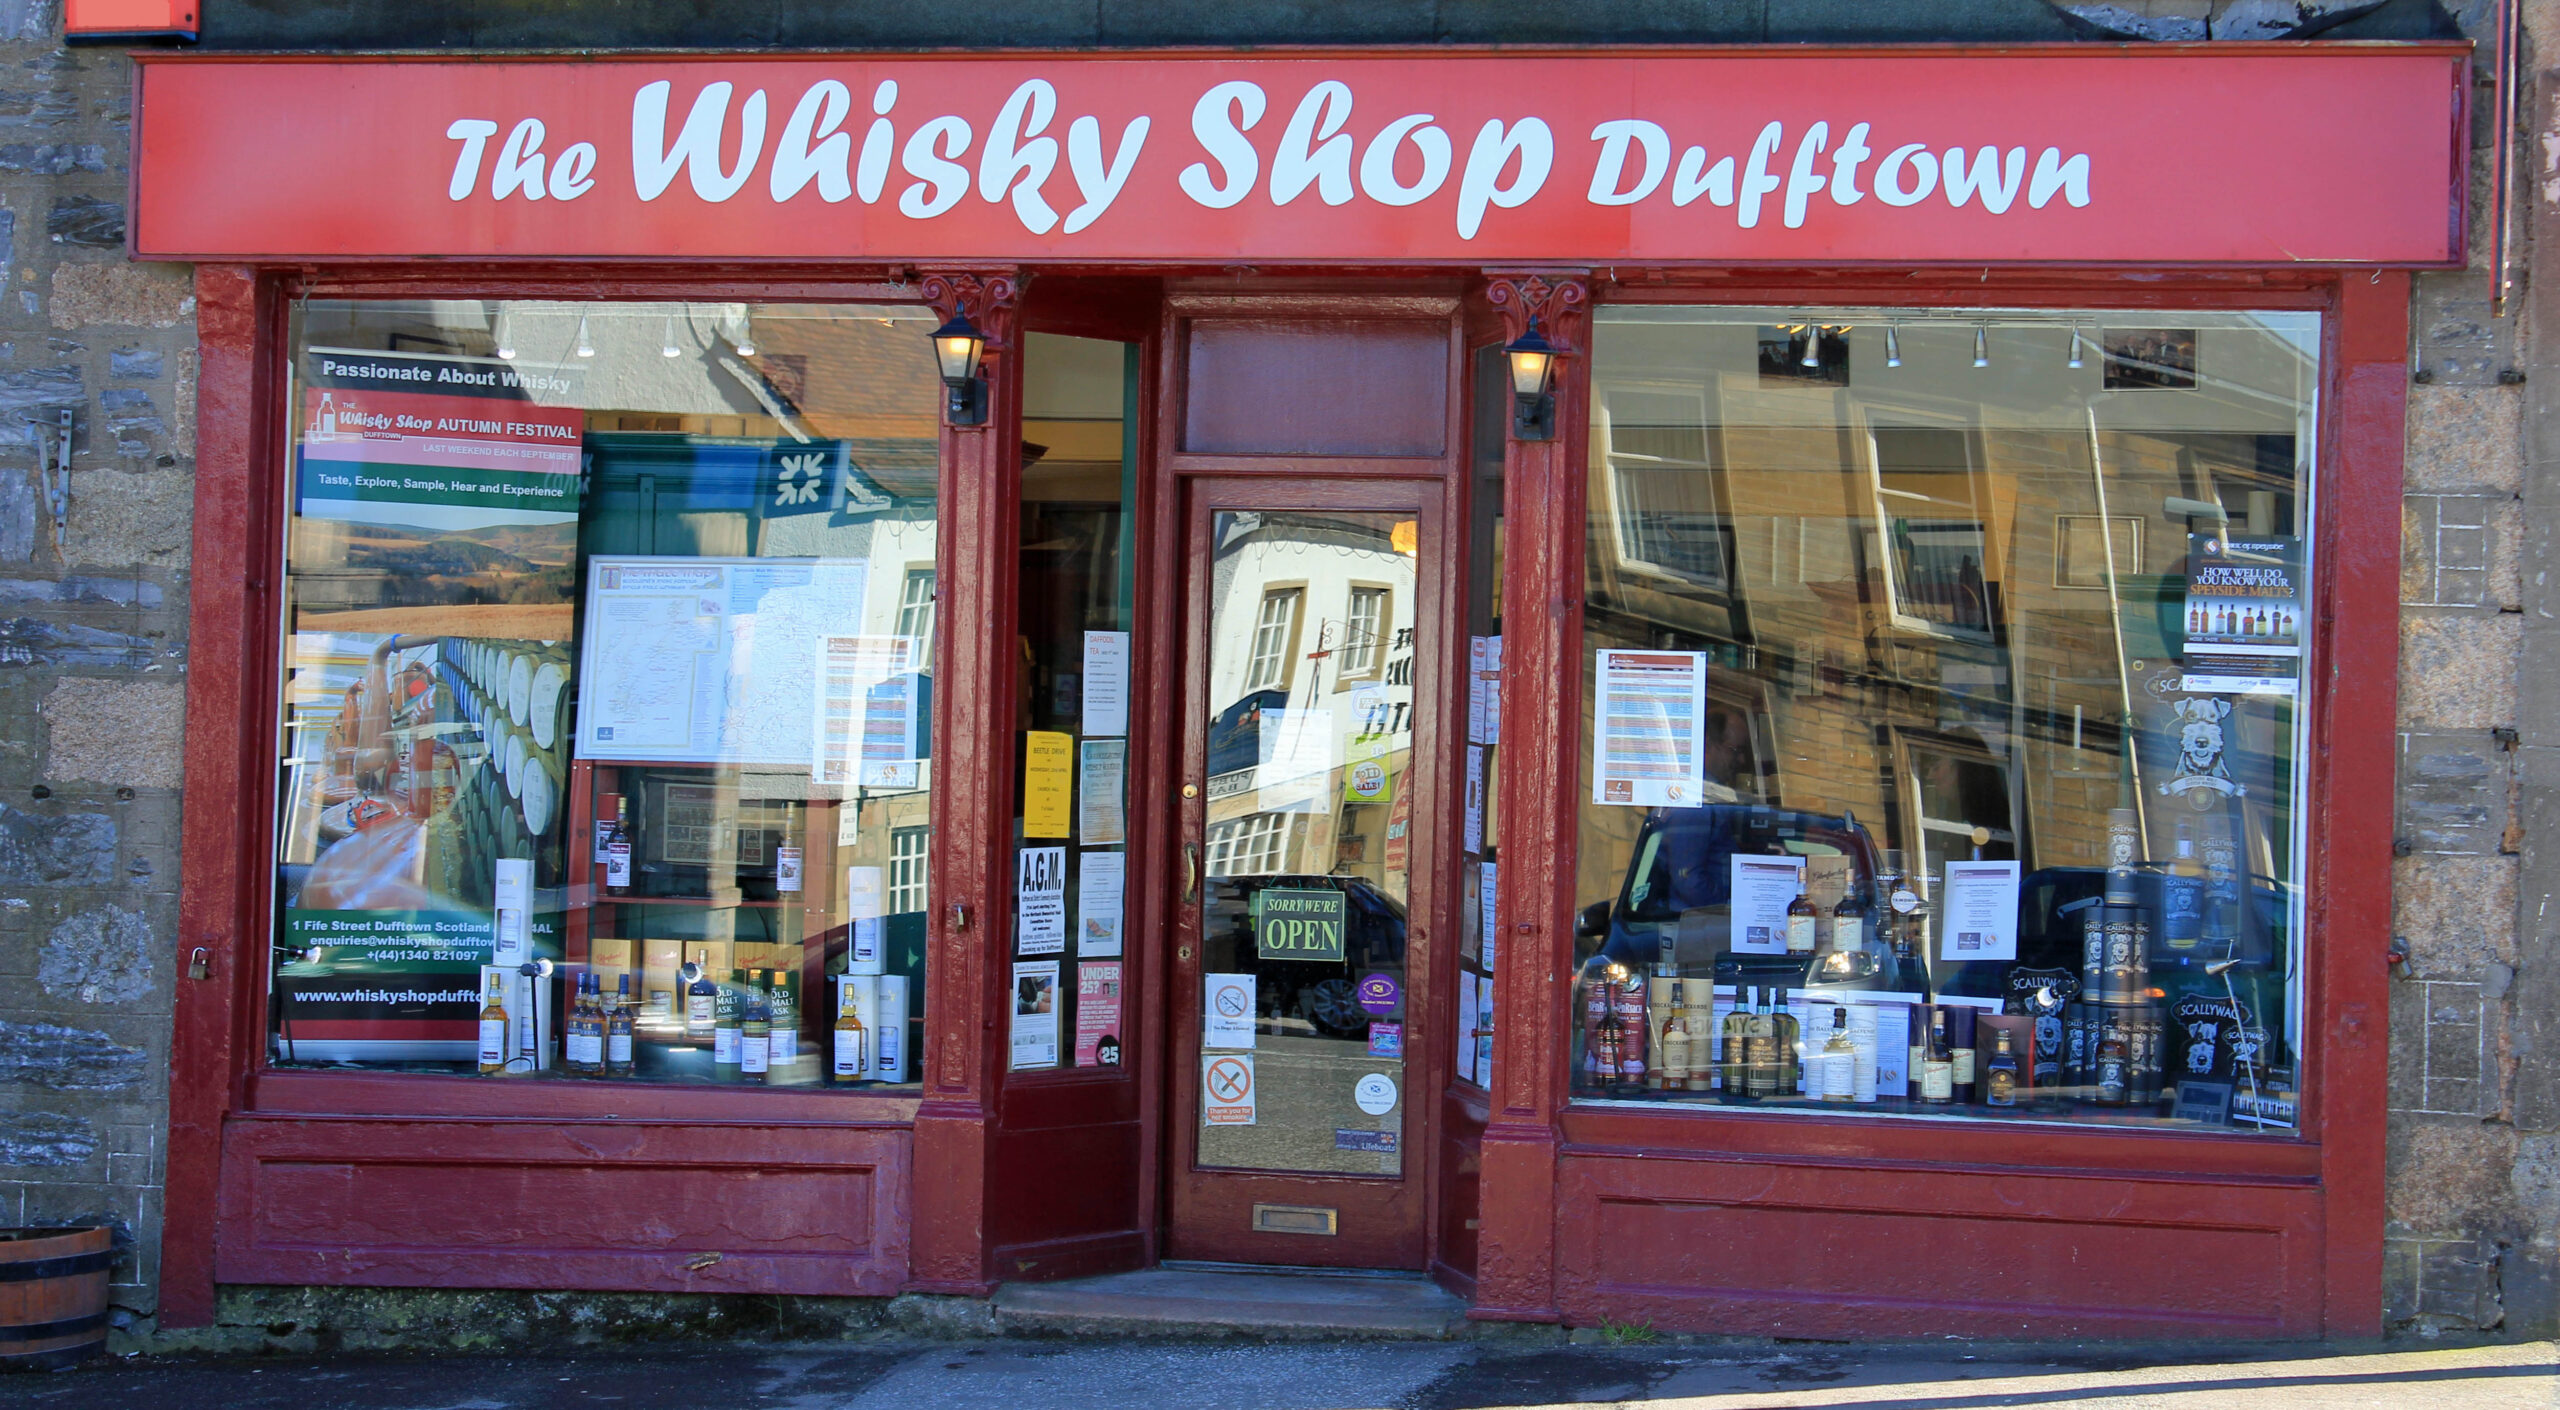 The Whisky Shop Dufftown